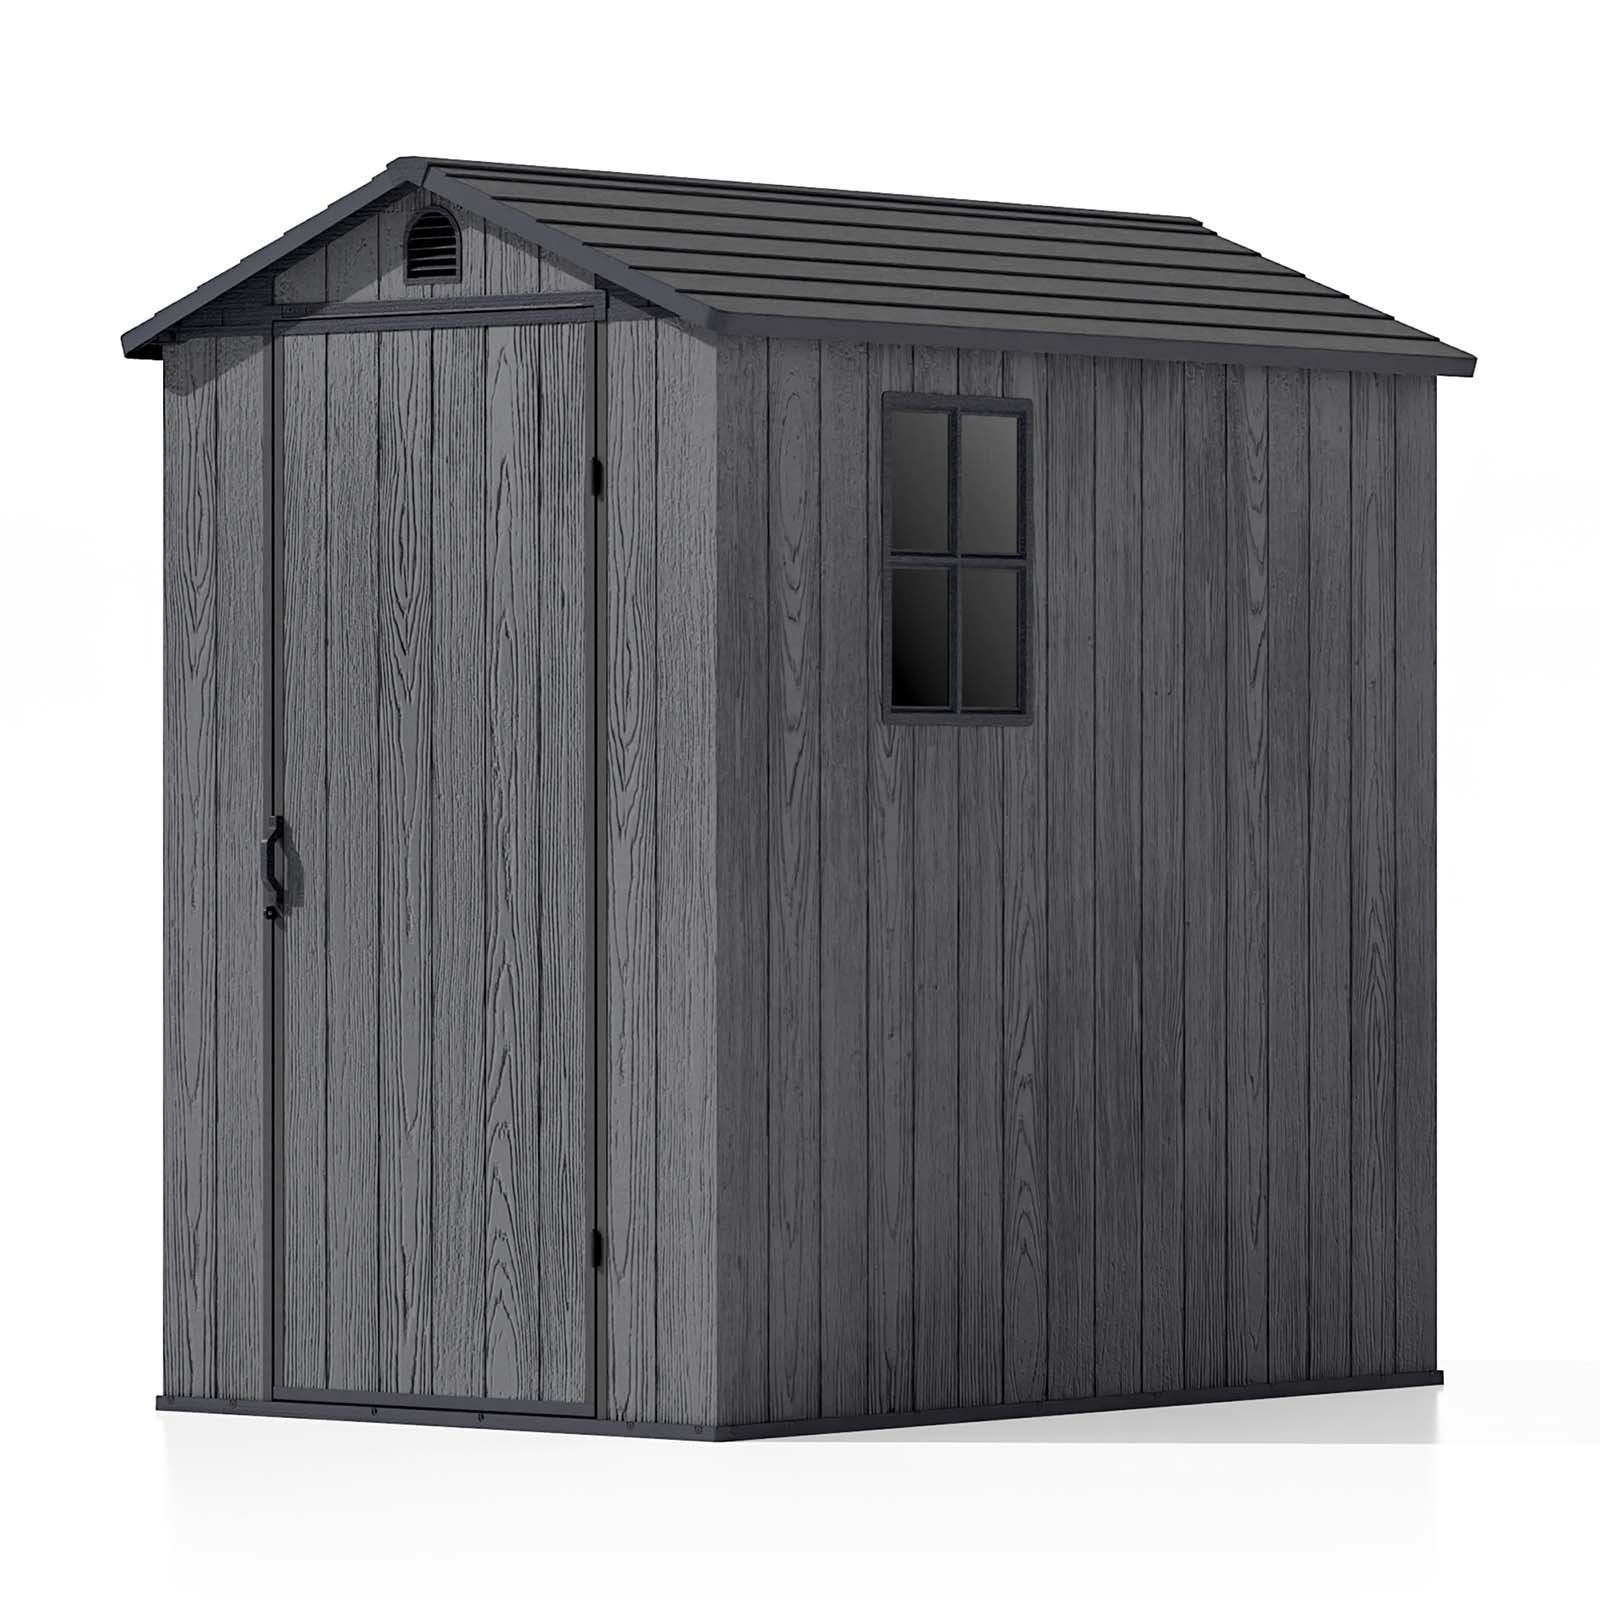 

4 X 6 Ft Plastic Outdoor Storage Shed With Floor, Resin Outside Tool Shed With Windows And Lockable Door For Backyard Garden Patio Lawn, Gray (fit-it Shed)